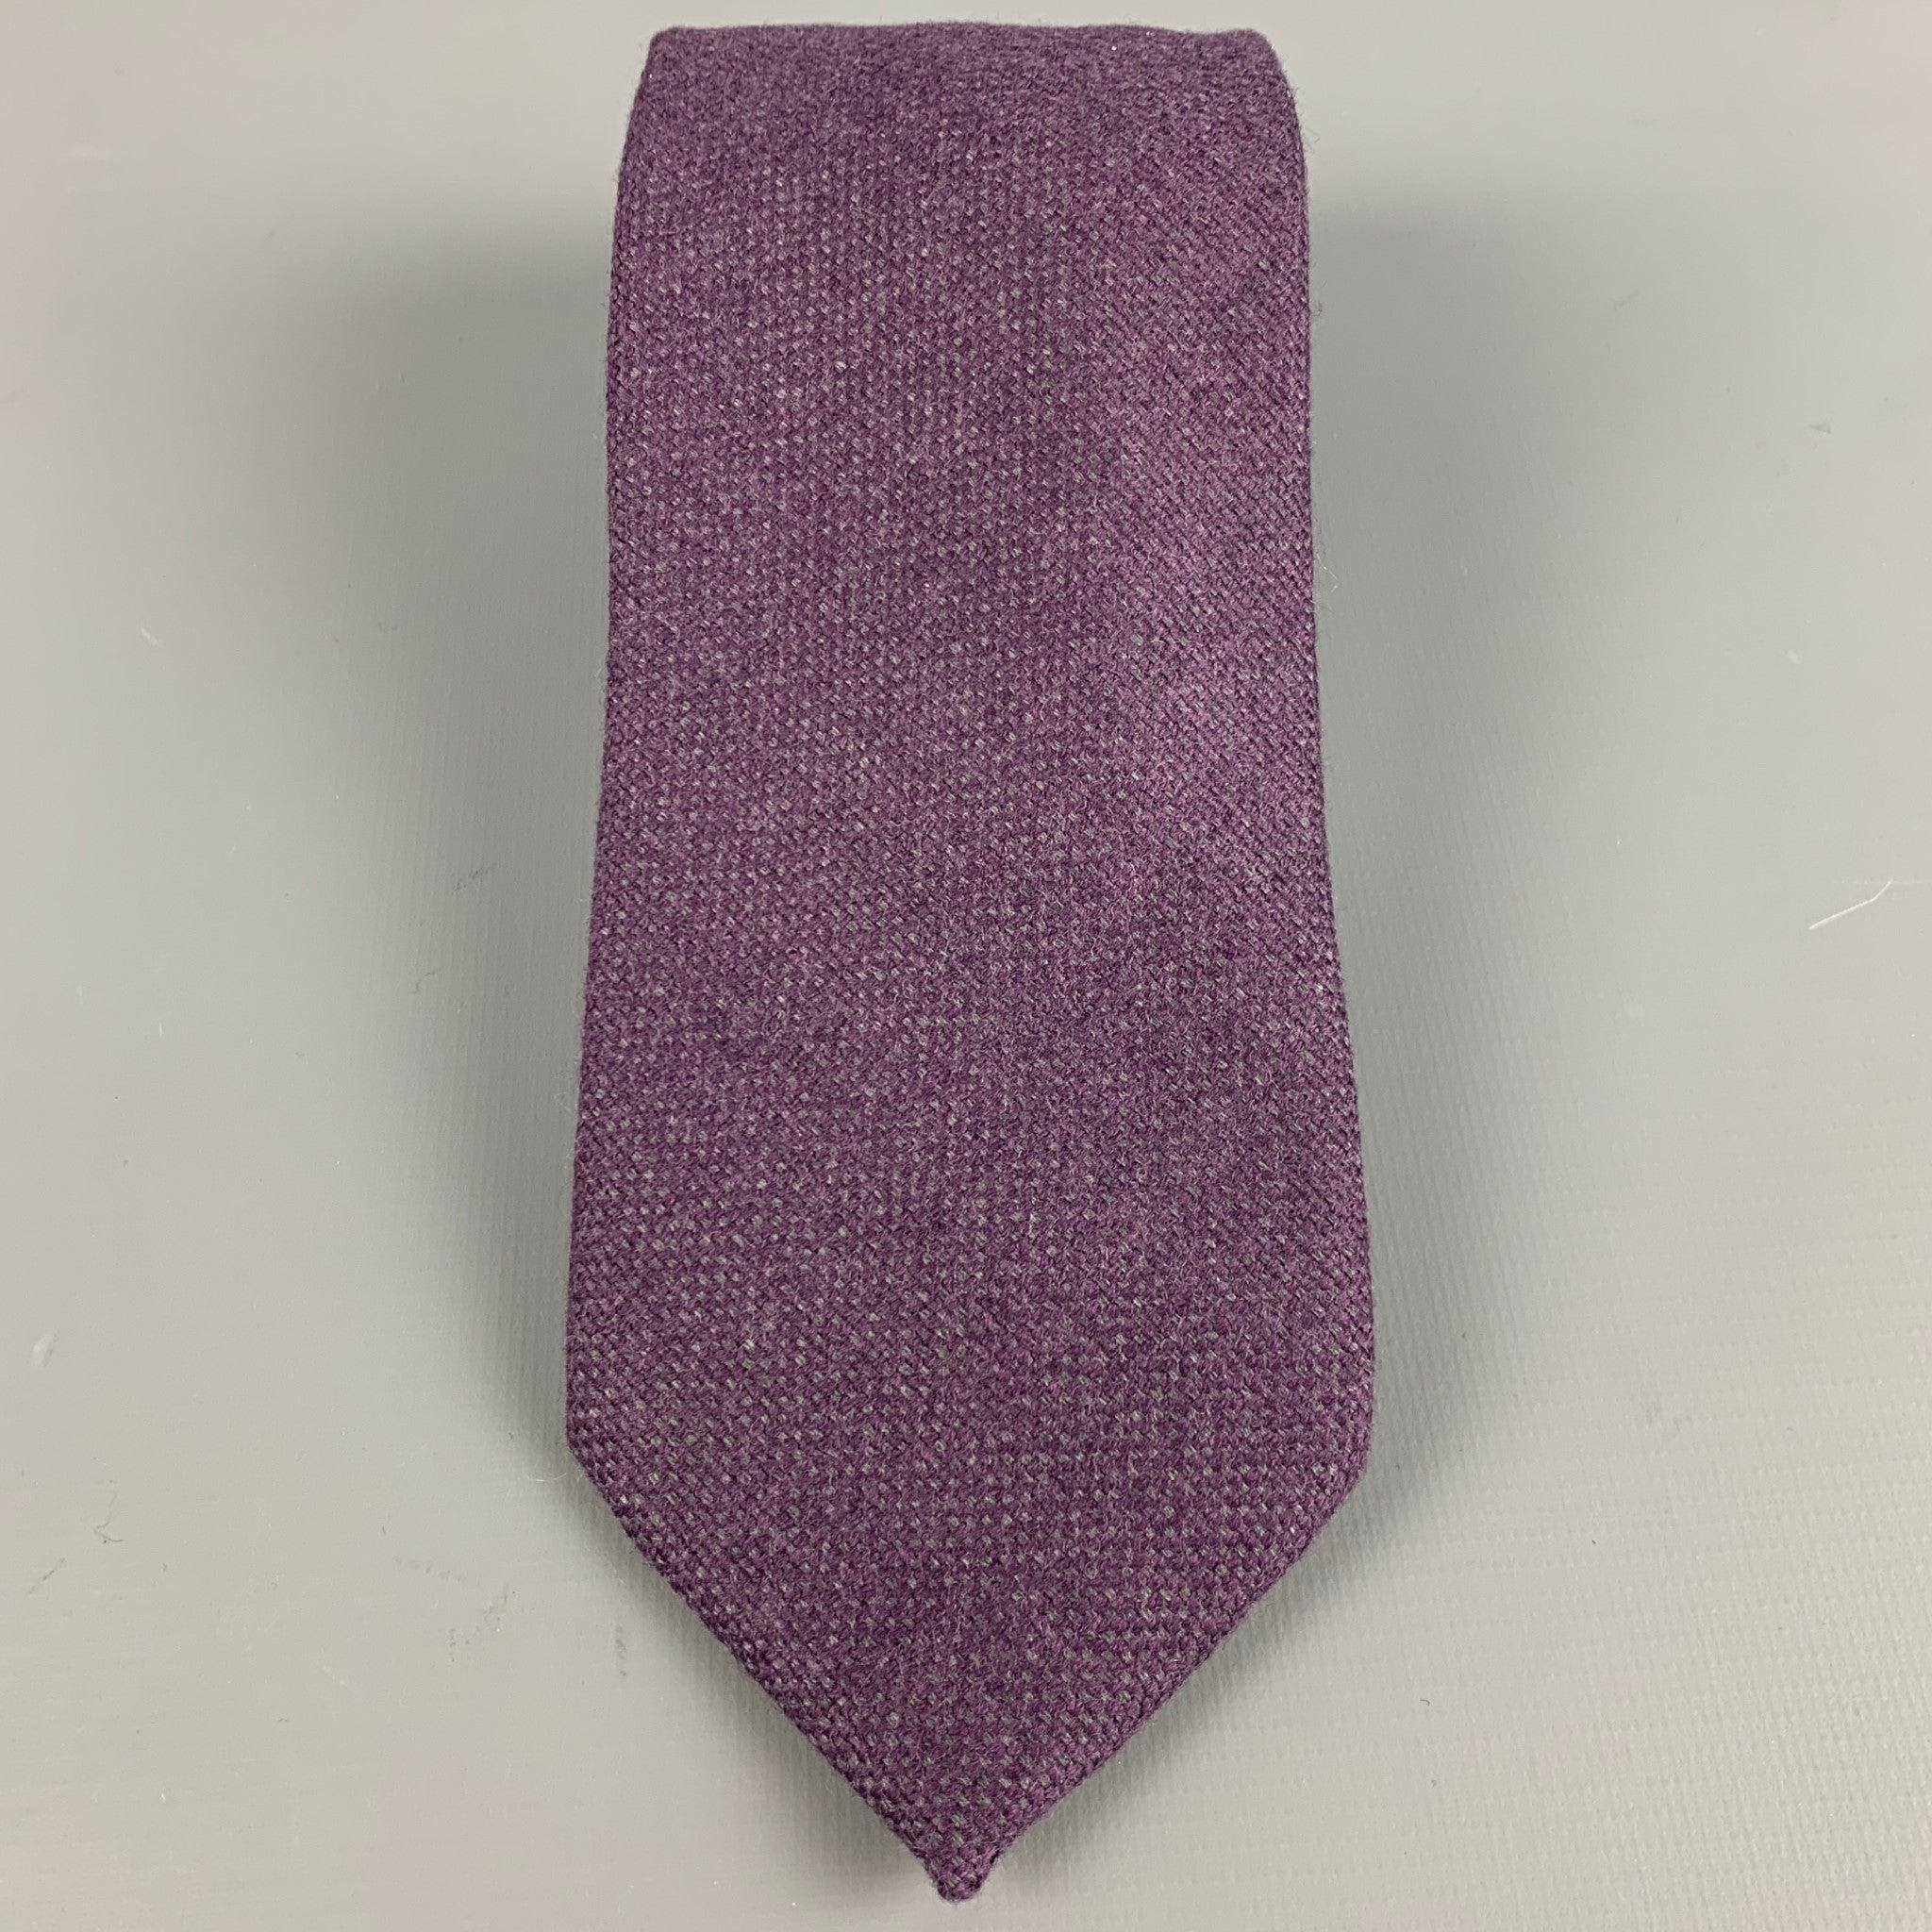 LUCIANO BARBERA necktie
in a purple and grey wool featuring a subtle woven pattern. Made in Italy.Very Good Pre-Owned Condition. Minor signs of wear. 

Measurements: 
  Width: 3 inches Length: 59 inches 
  
  
 
Reference: 127746
Category: Tie
More